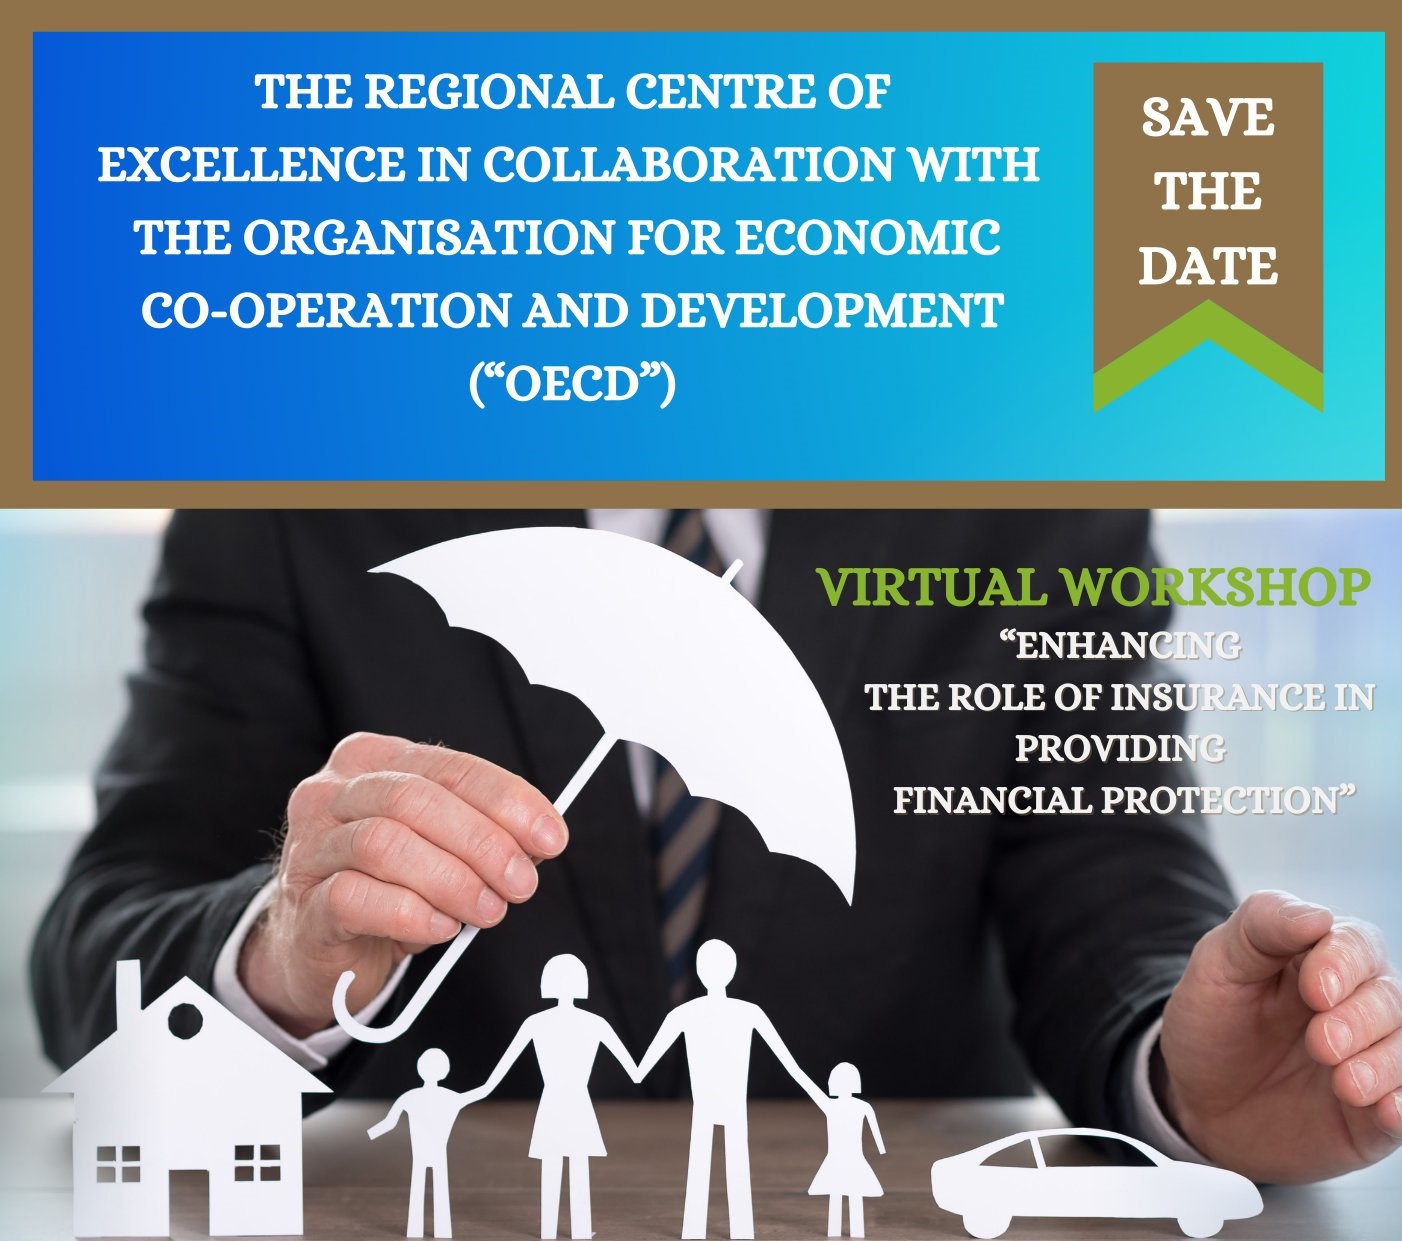 Professor Paula Jarzabkowski spoke at the Financial Services Commission Mauritius Regional Centre of Excellence - OECD Virtual Workshop on Enhancing the Role of Insurance in Providing Financial Protection